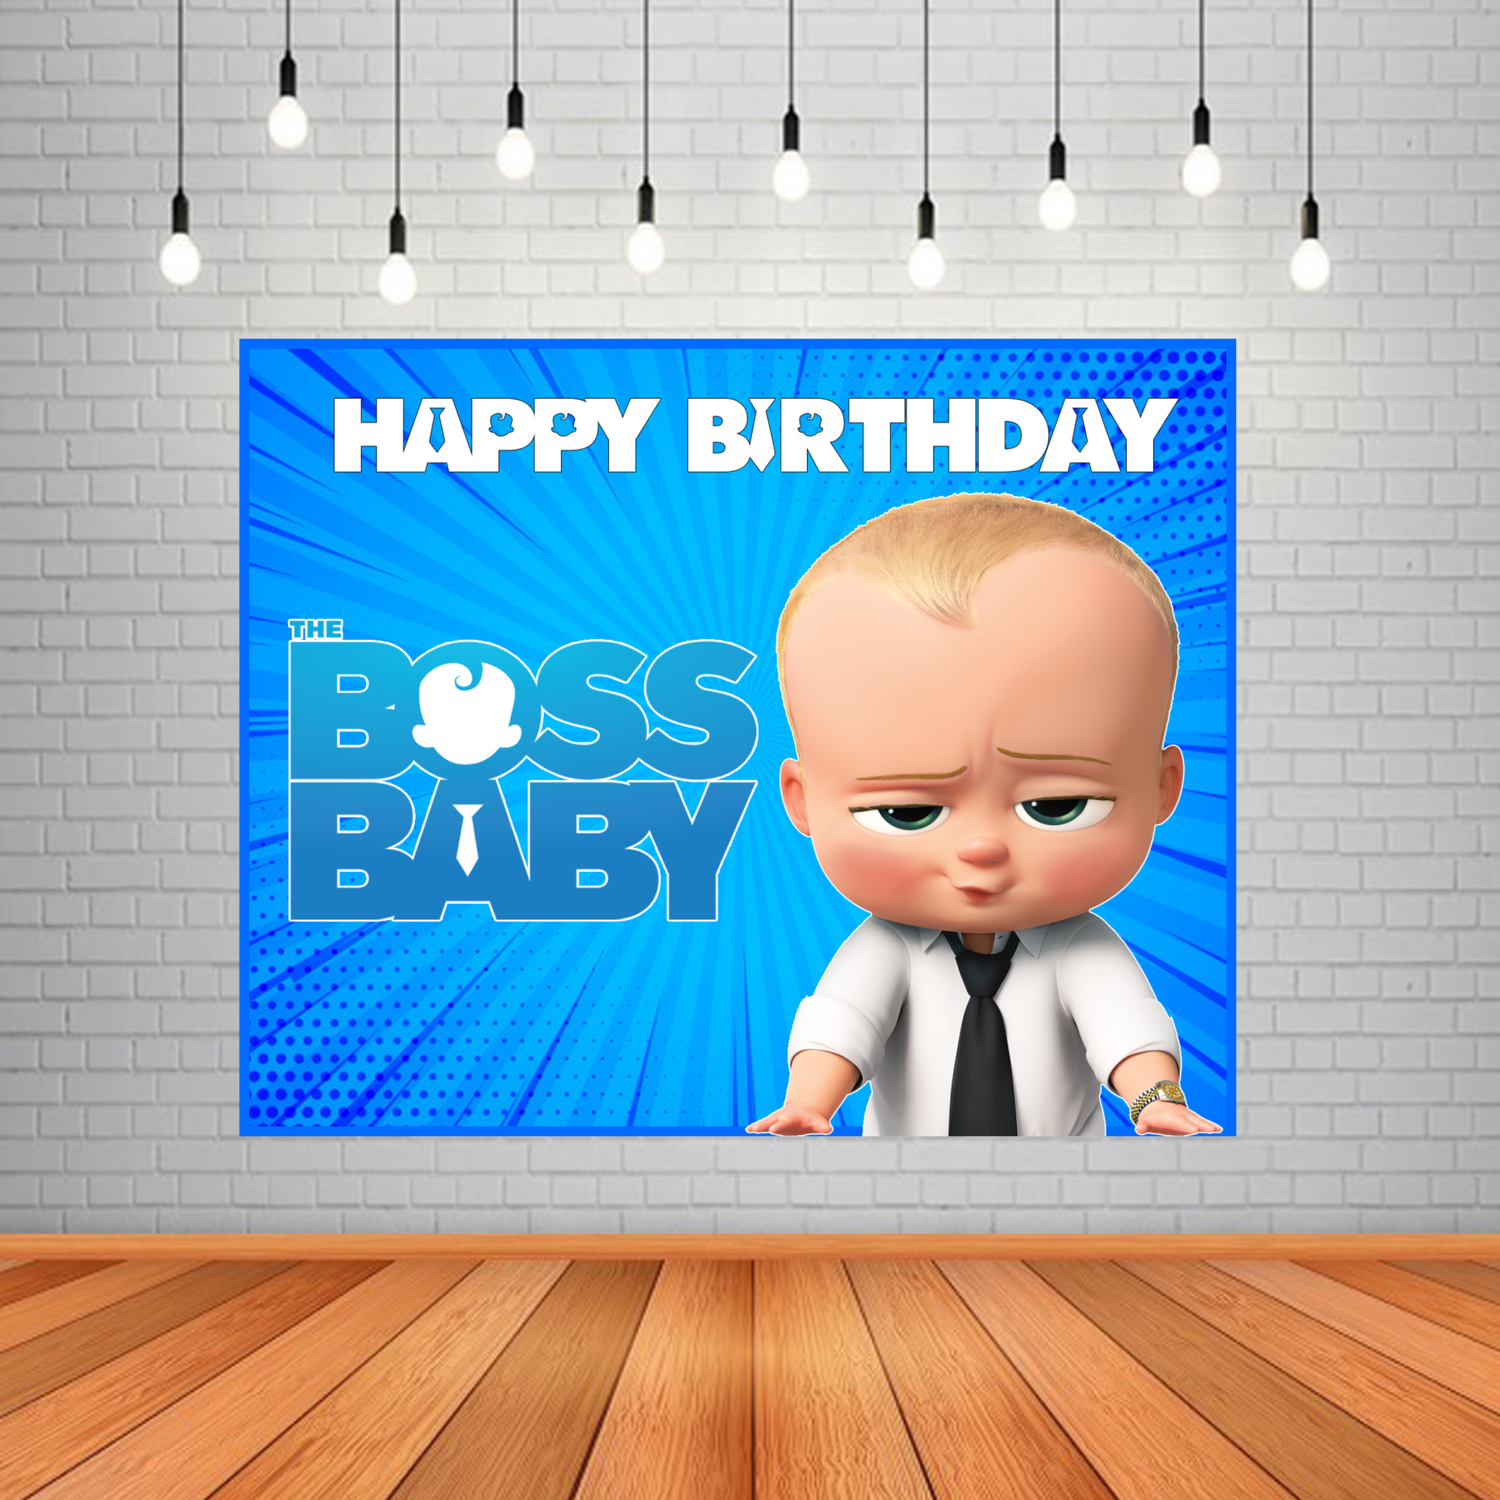 Boss Baby Backdrop / Background Banner (4ft x 5ft) #3